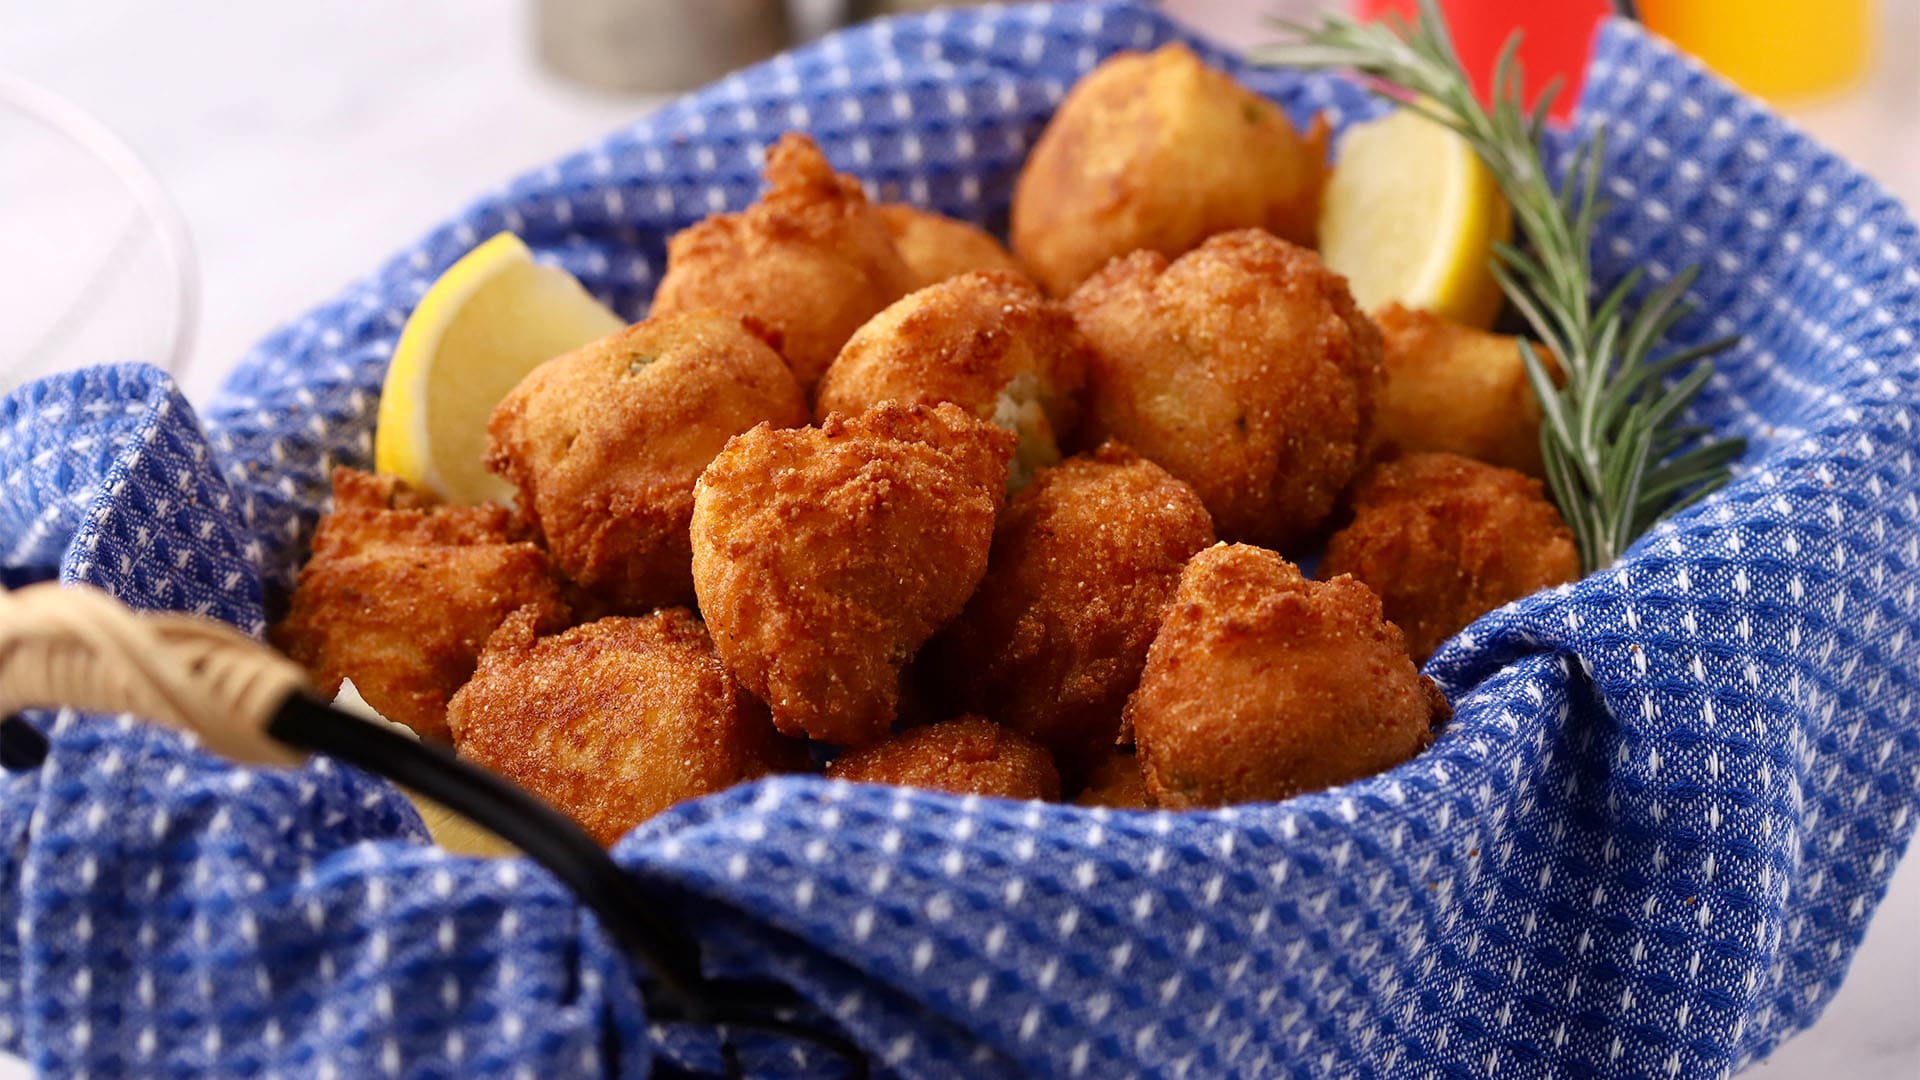 Hush Puppies Recipe, Southern-Style - Southern Plate